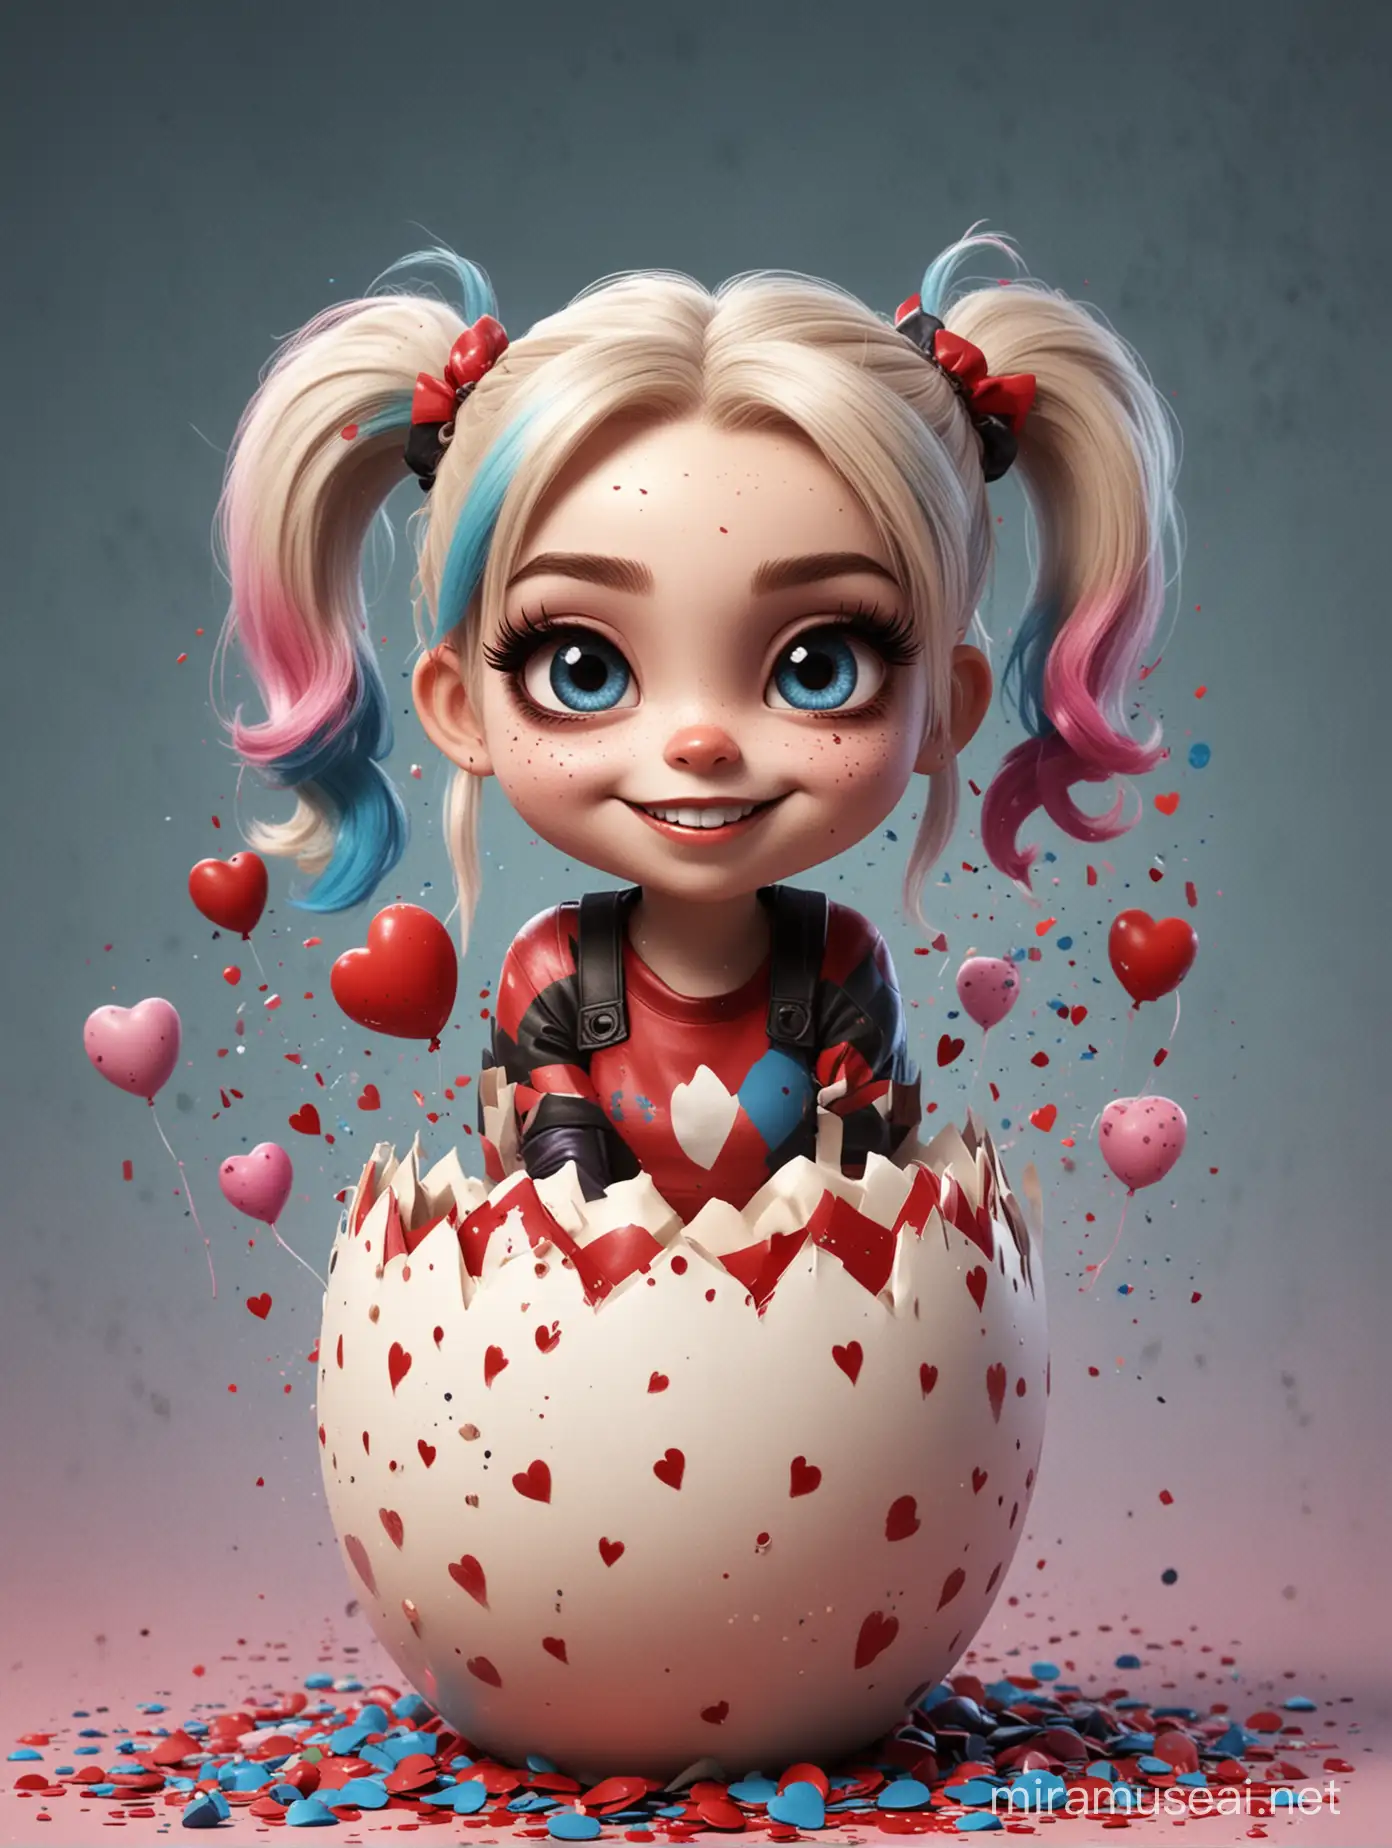 baby harley quinn hatching from an egg. use carricature chibi style. Make her features stand out by giving her large eyes, a grin, and wild pigtails. dont forget to use red and blue color that is harley quinn's characteristic. The cracked egg features spiderwebs, small fissures, and a textured, speckled appearance. Simple background choices include speech bubbles with an unexpected Harley quote, hearts and playing card symbols, and confetti. You might also add a gigantic mallet, little hands and feet sticking out. high contrast, high color effect, 8K, detail, focus